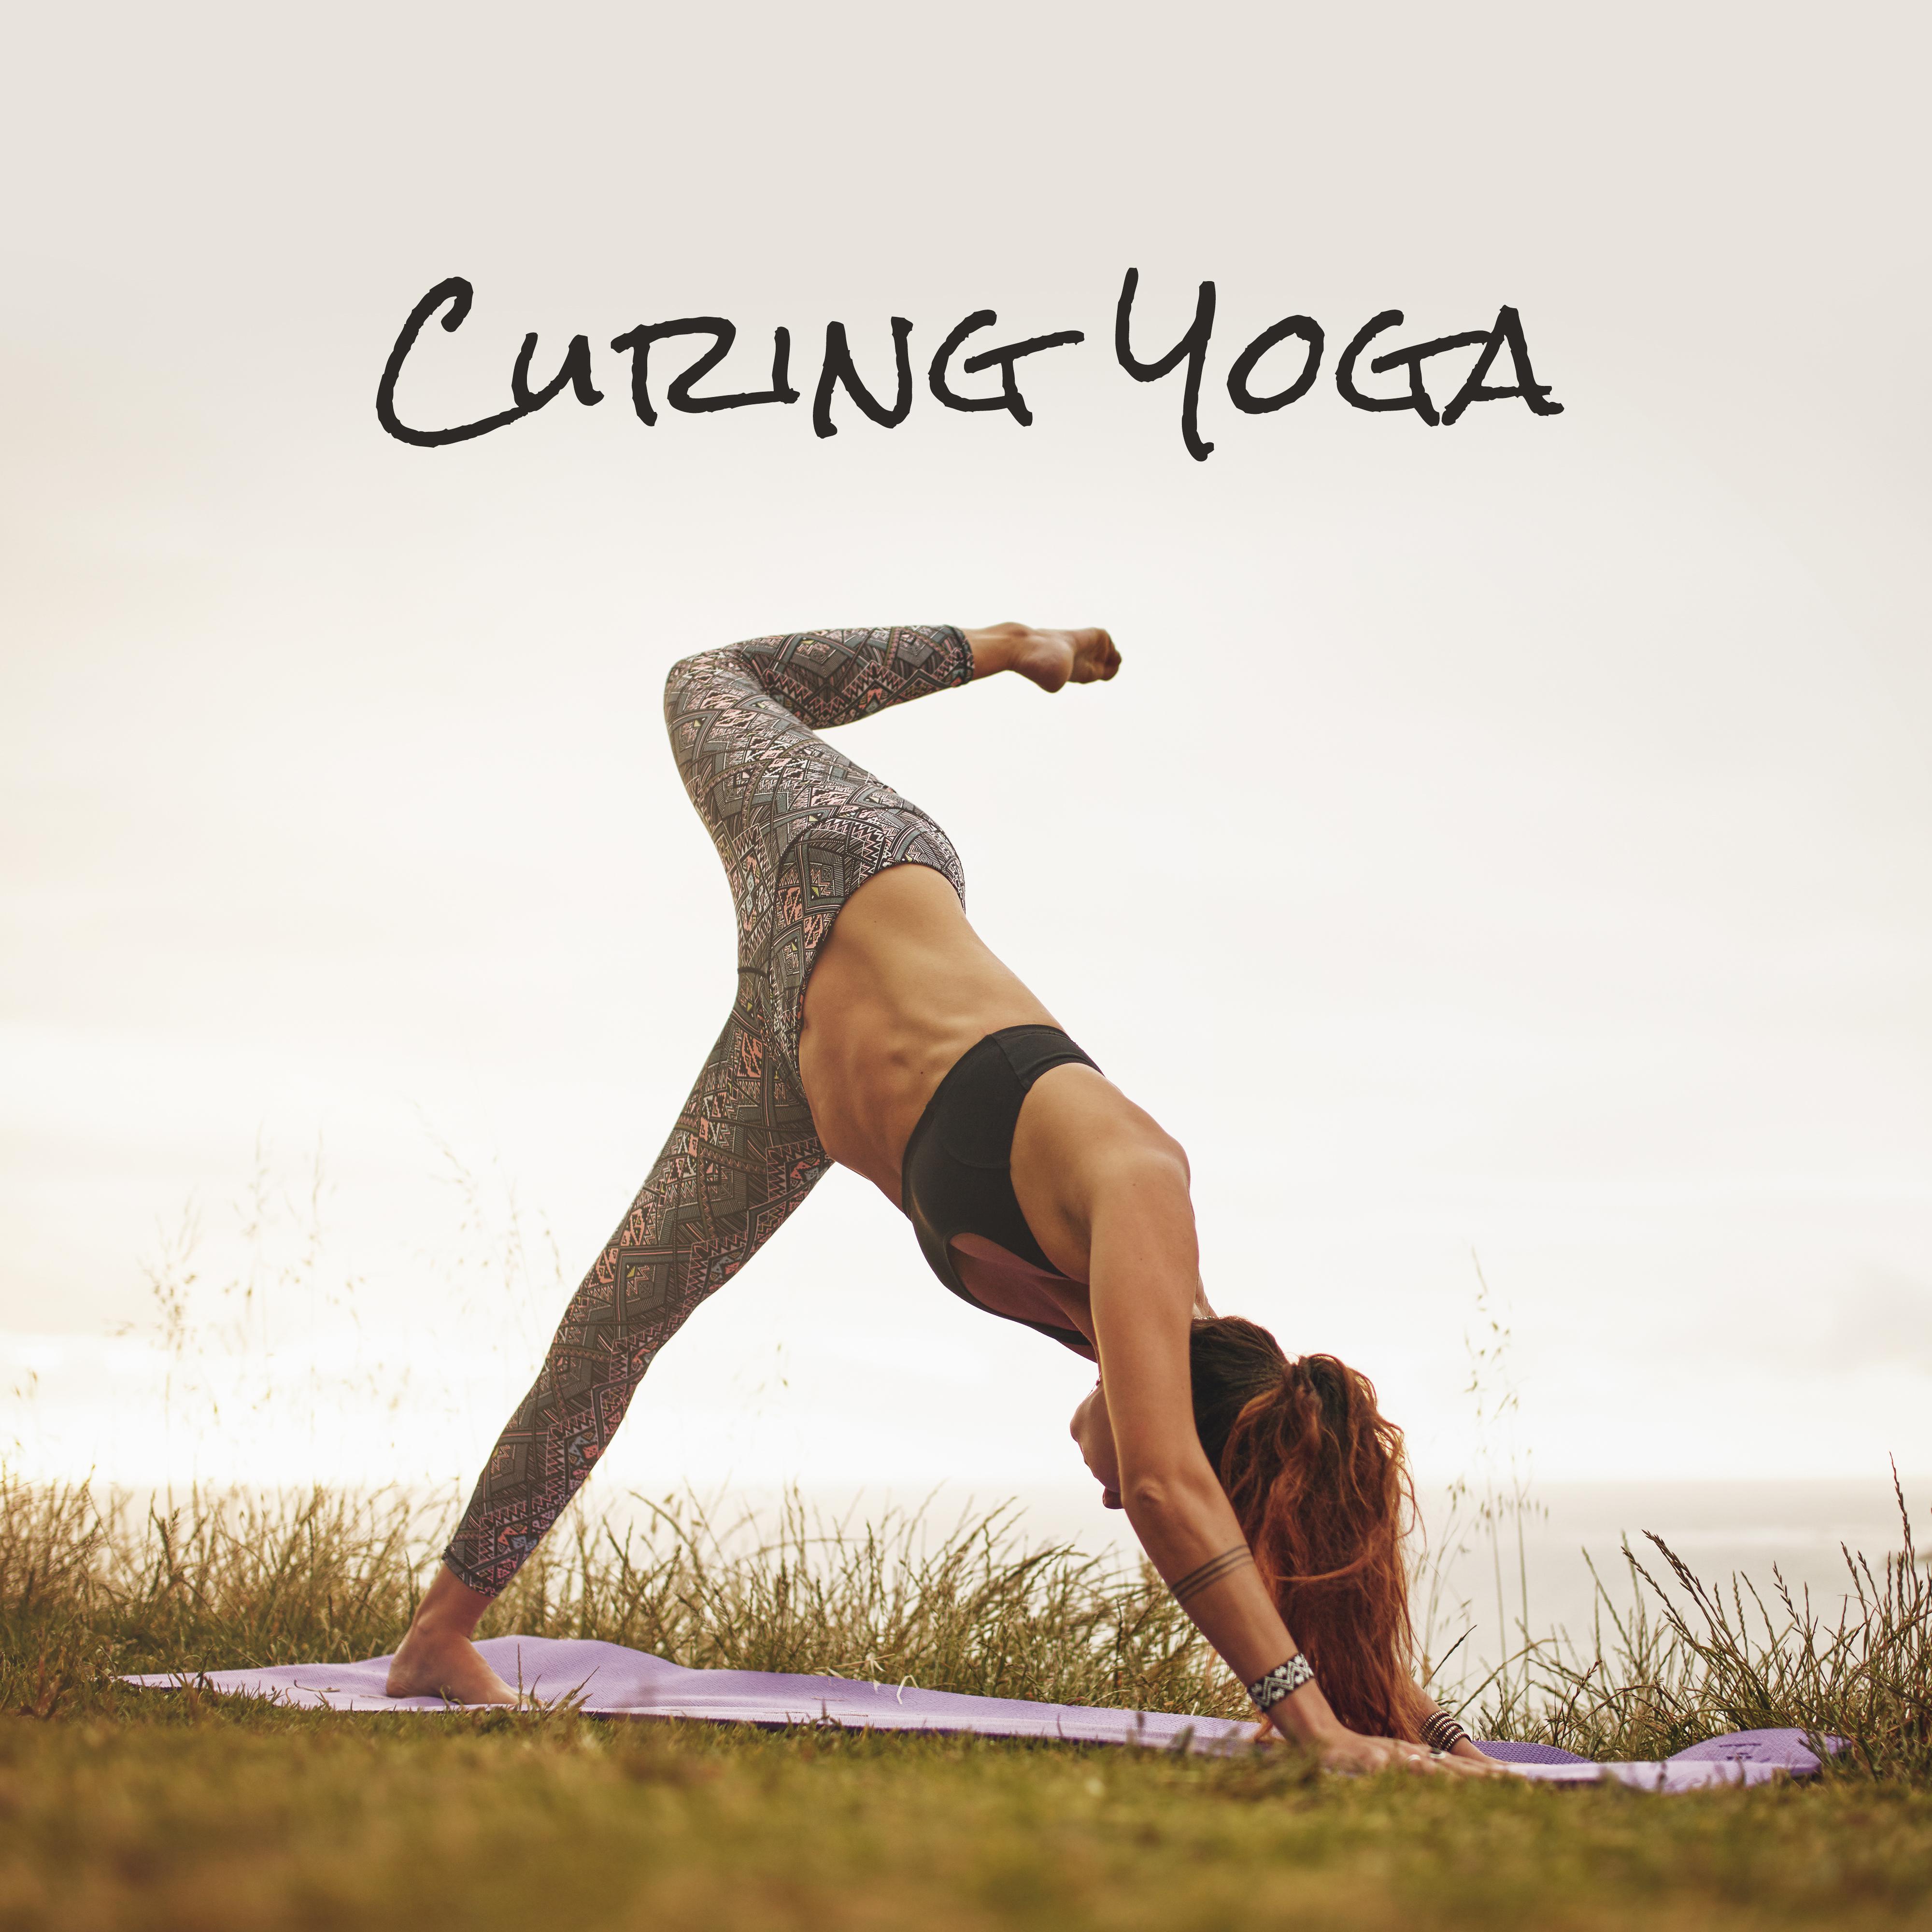 Curing Yoga - Universal Background Music for the Practice of Meditation and Yoga to Relieve Ailments